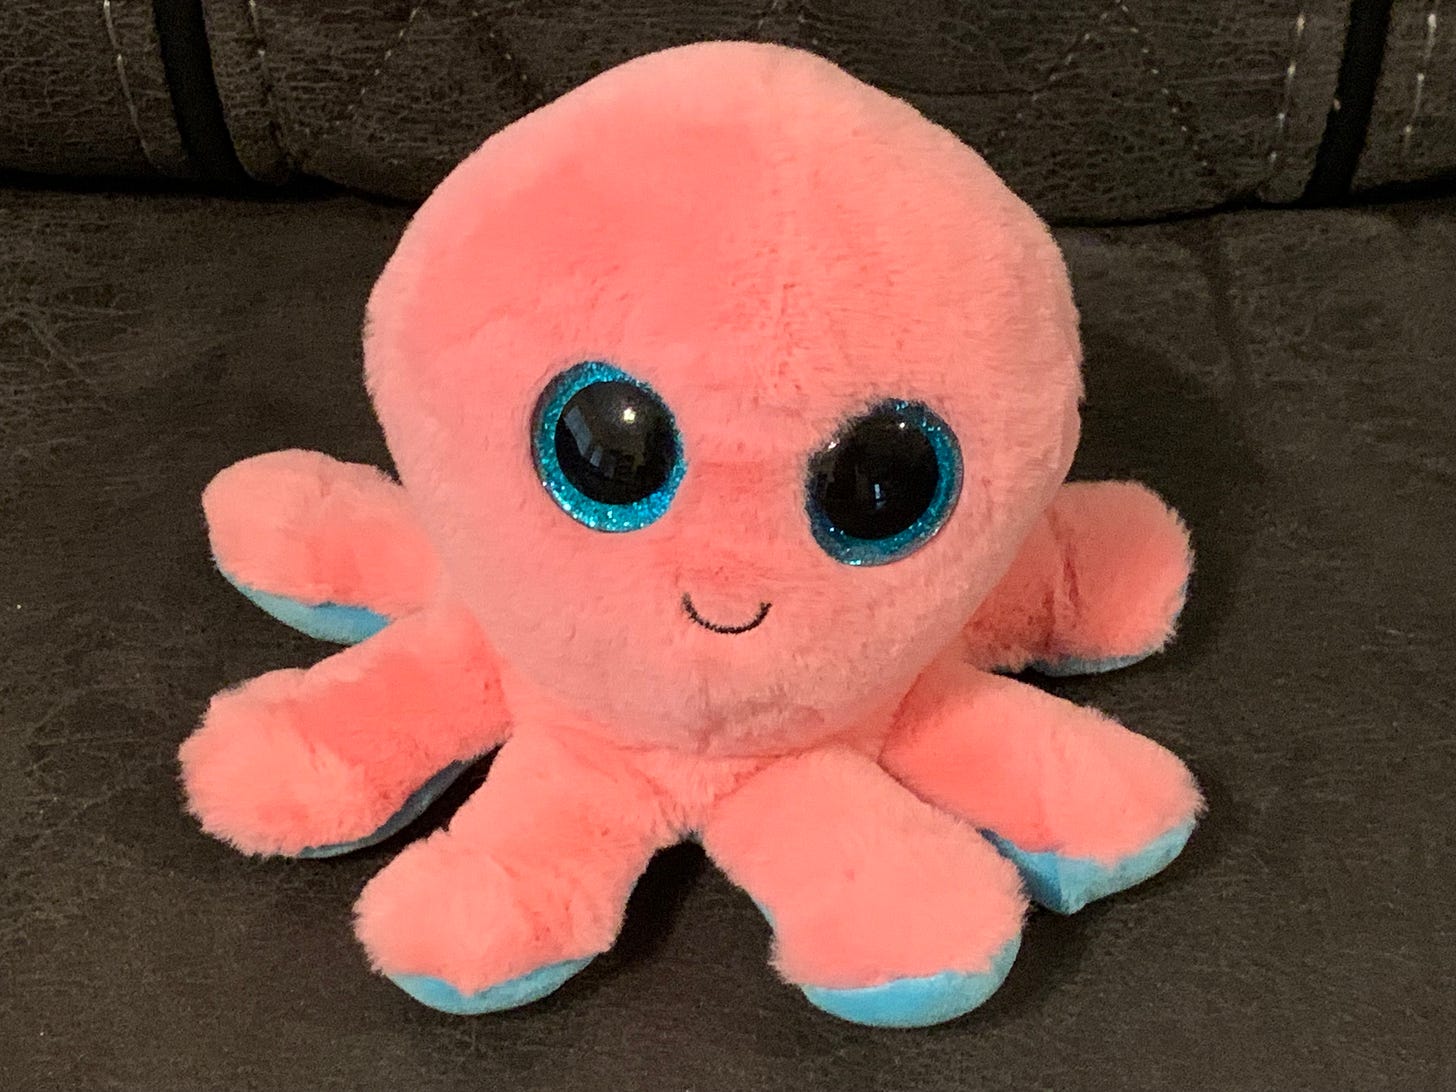 Smiling pink octopus stuffed animal with large blue eyes